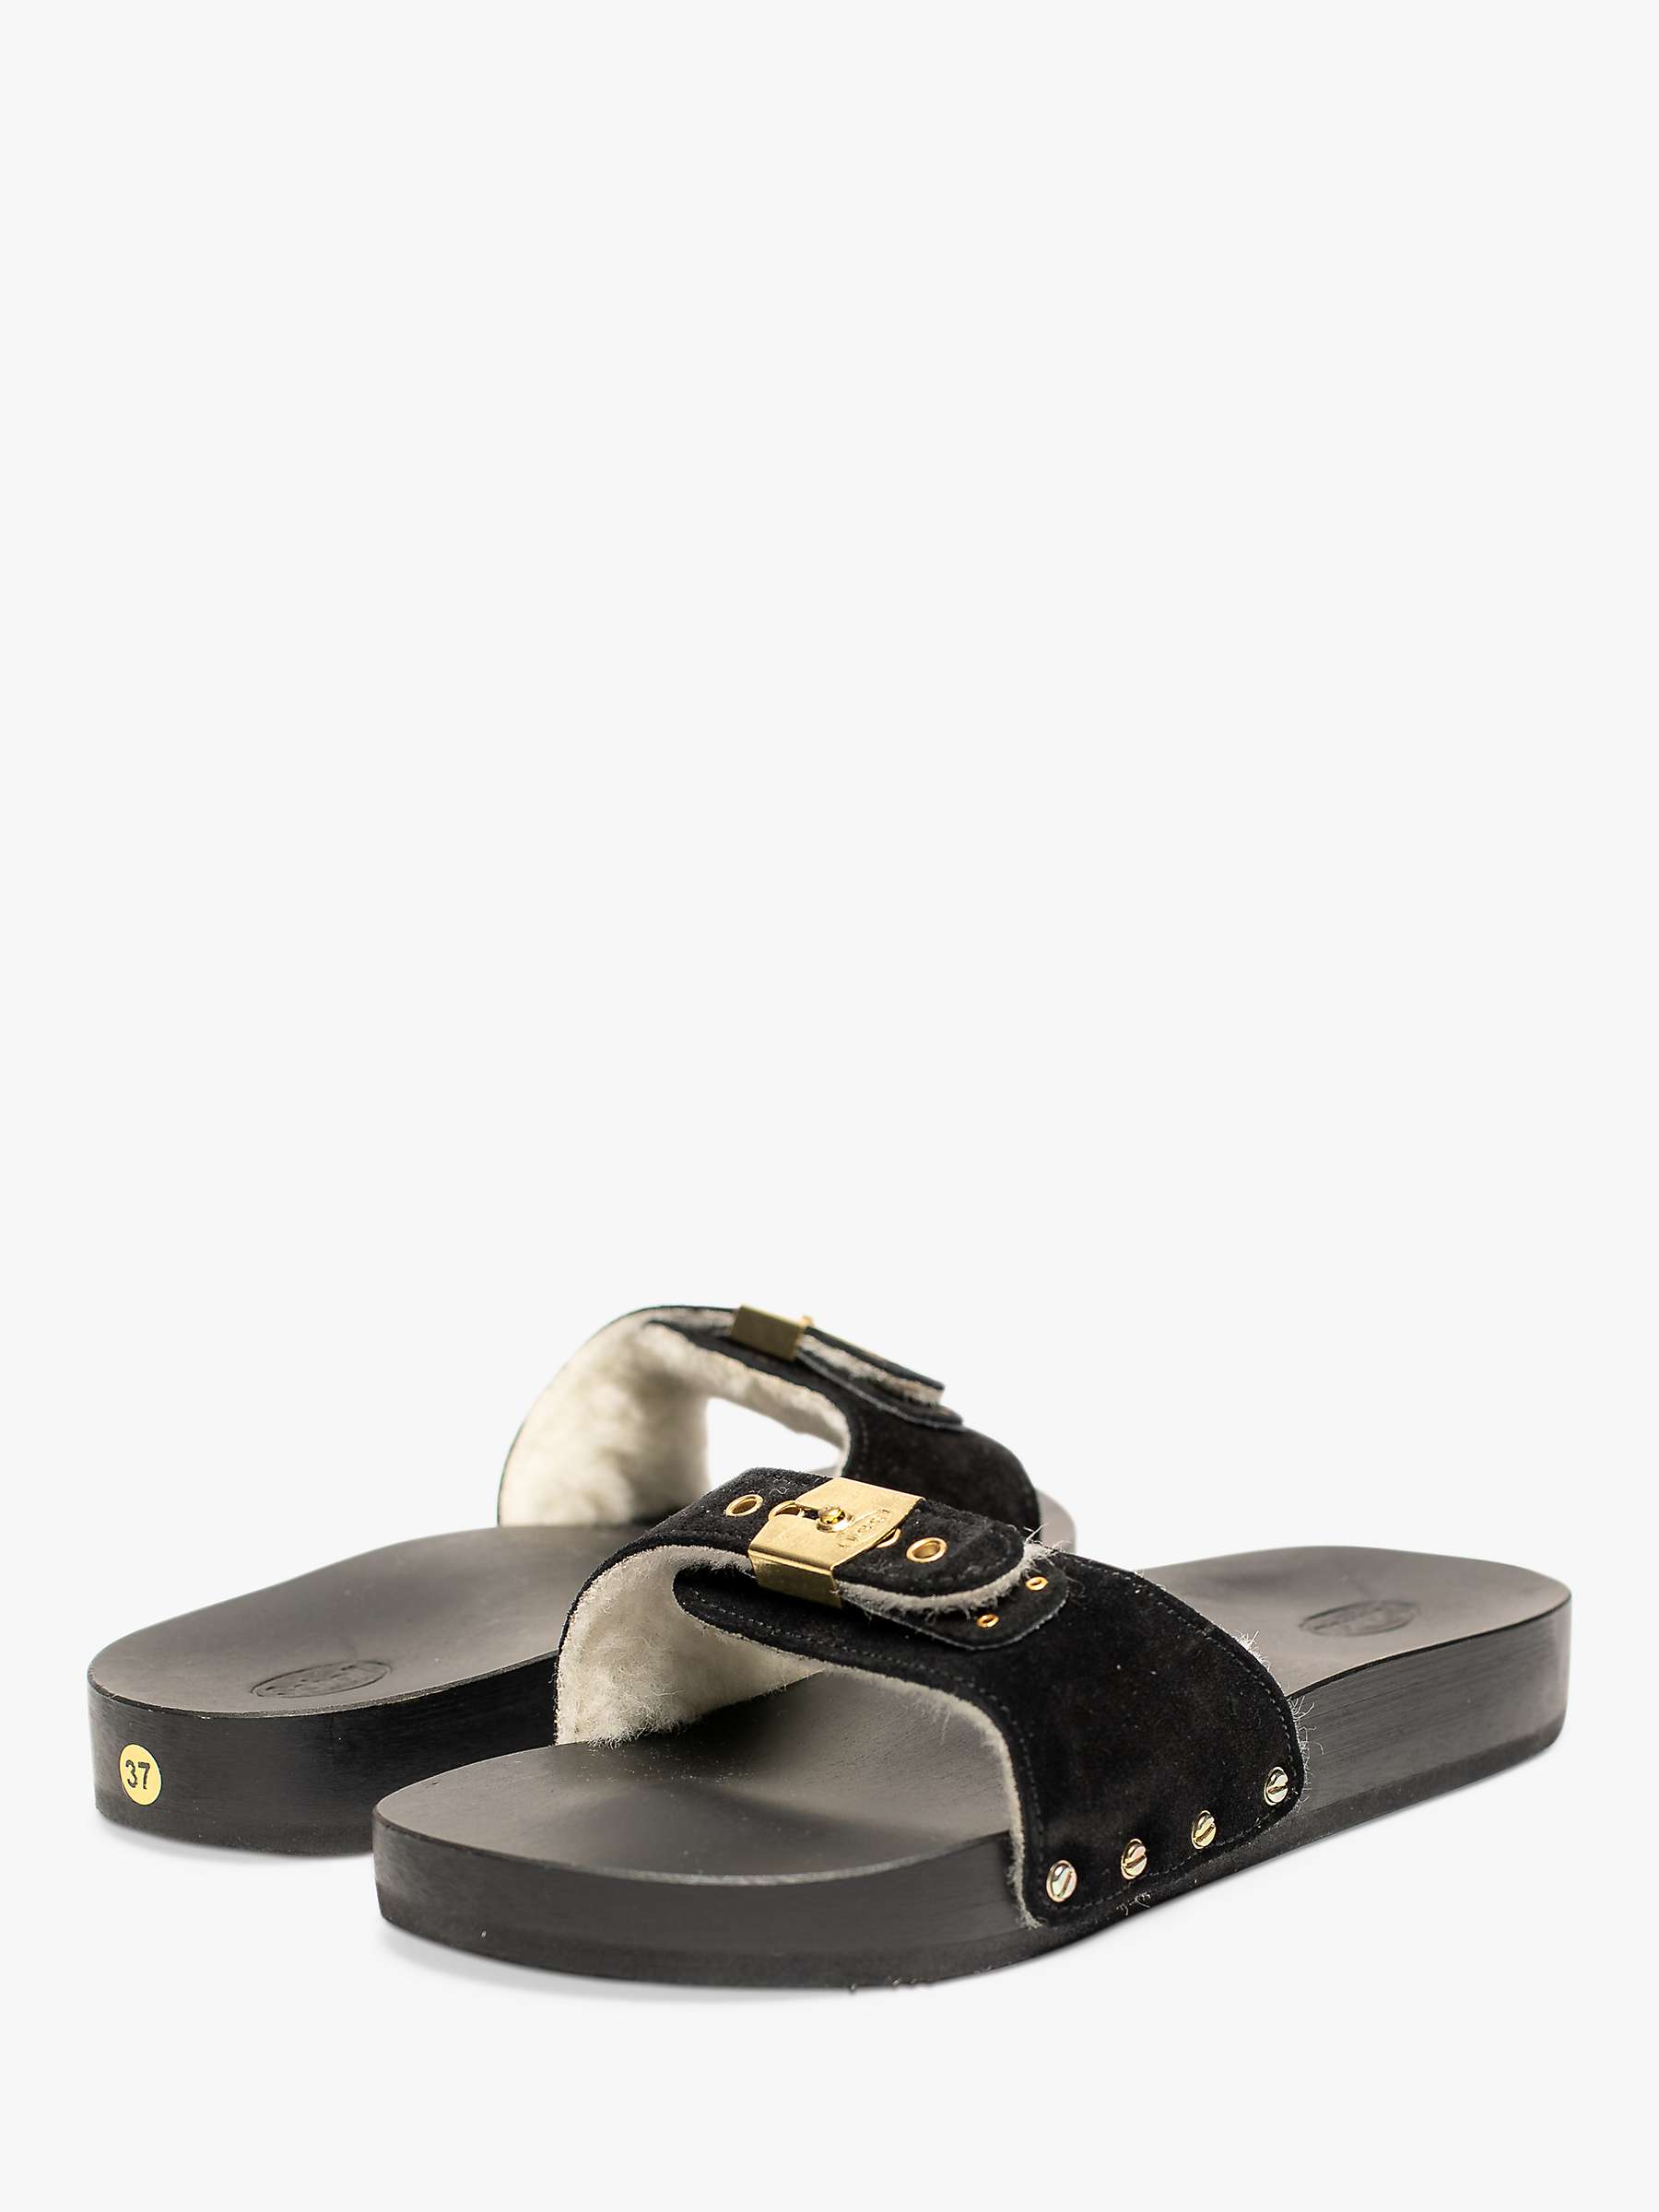 Buy Scholl Pescura Suede Wool-Lined Sandals, Black Online at johnlewis.com